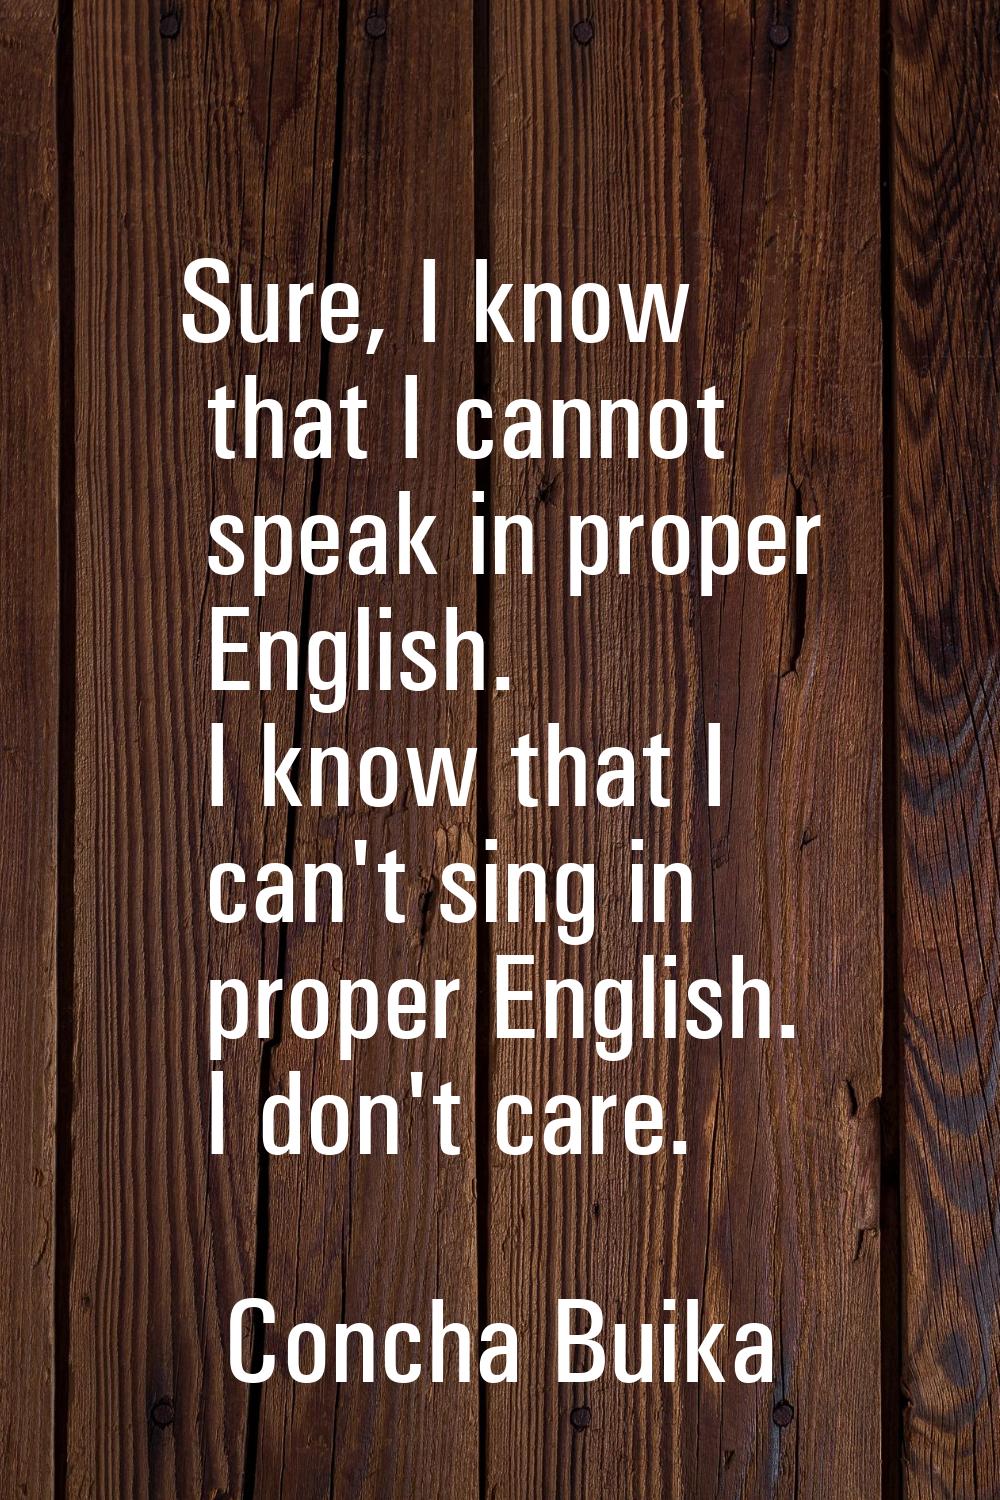 Sure, I know that I cannot speak in proper English. I know that I can't sing in proper English. I d